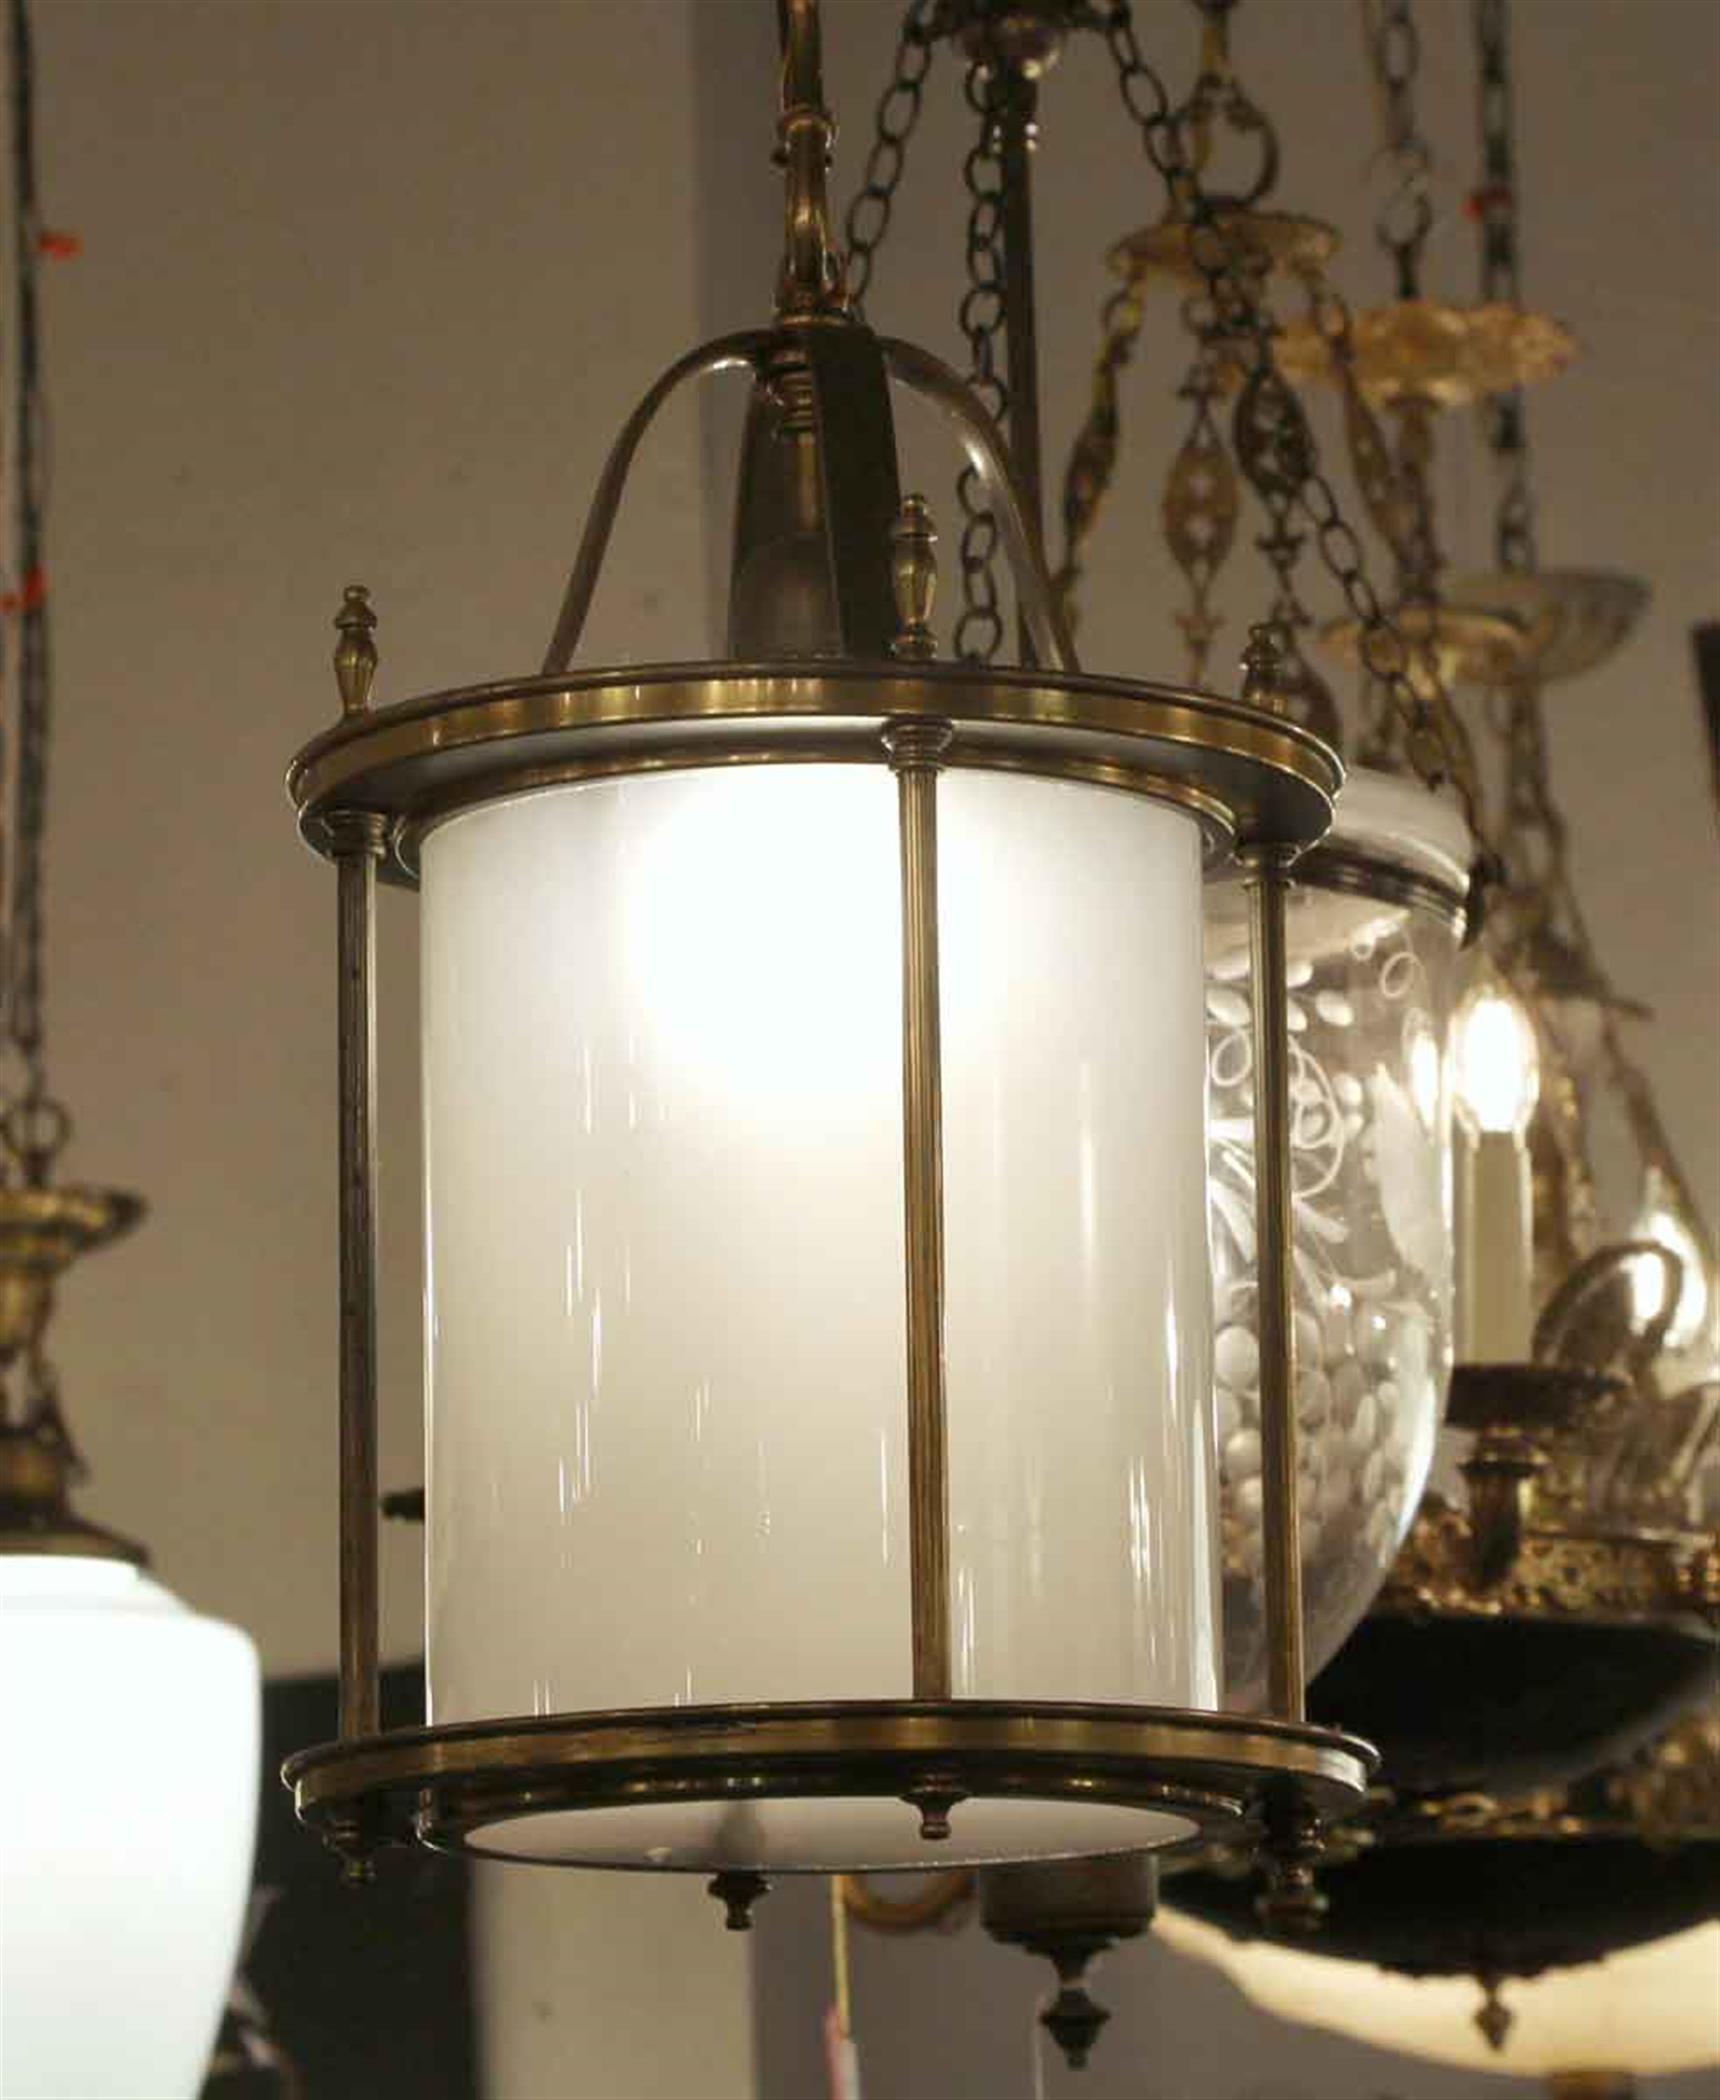 1950s single bulb lantern made of brass and white milk glass. Cleaned and rewired. Small quantity available at time of posting. Please inquire. Priced each. Please note, this item is located in one of our NYC locations.